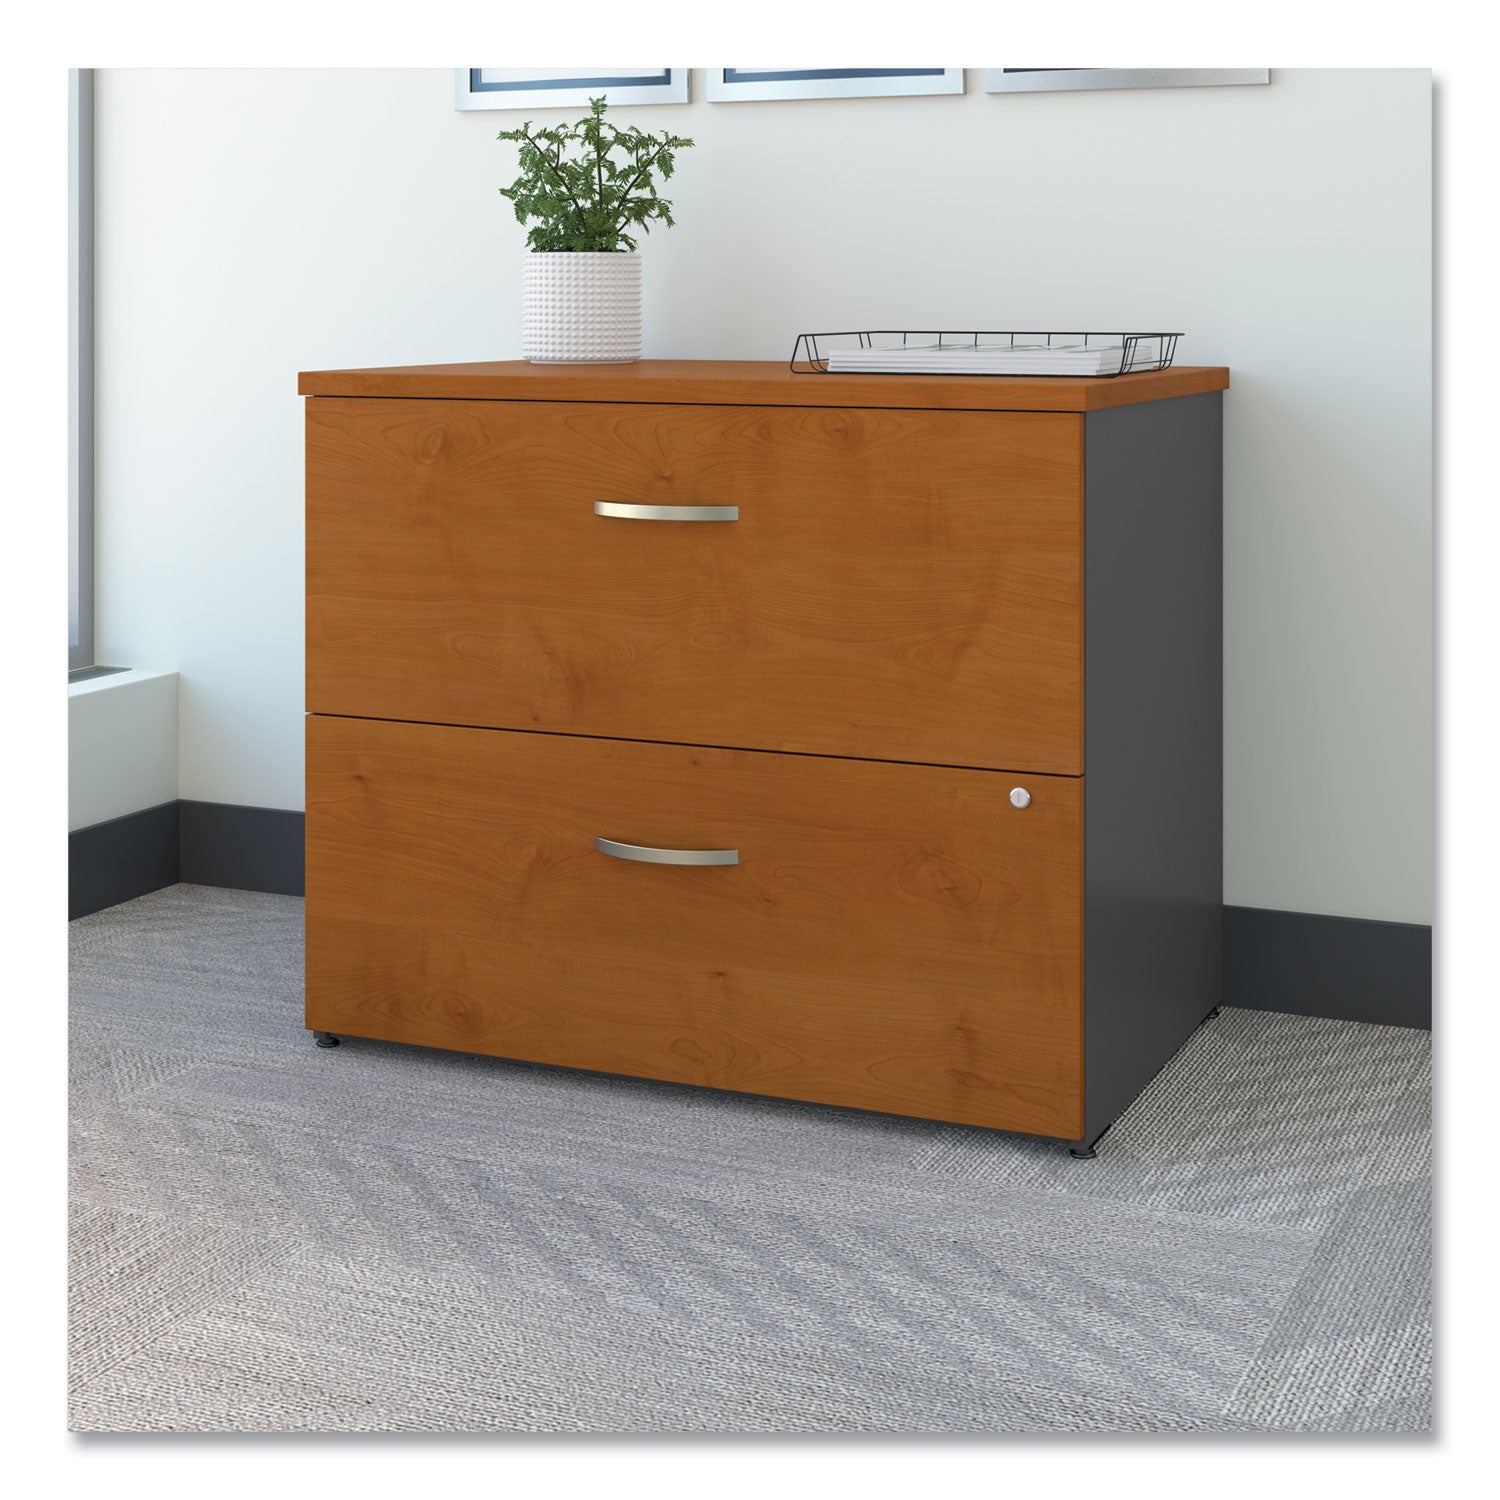 Series C Lateral File, 2 Legal/Letter/A4/A5-Size File Drawers, Natural Cherry/Graphite Gray, 35.75" x 23.38" x 29.88 - 